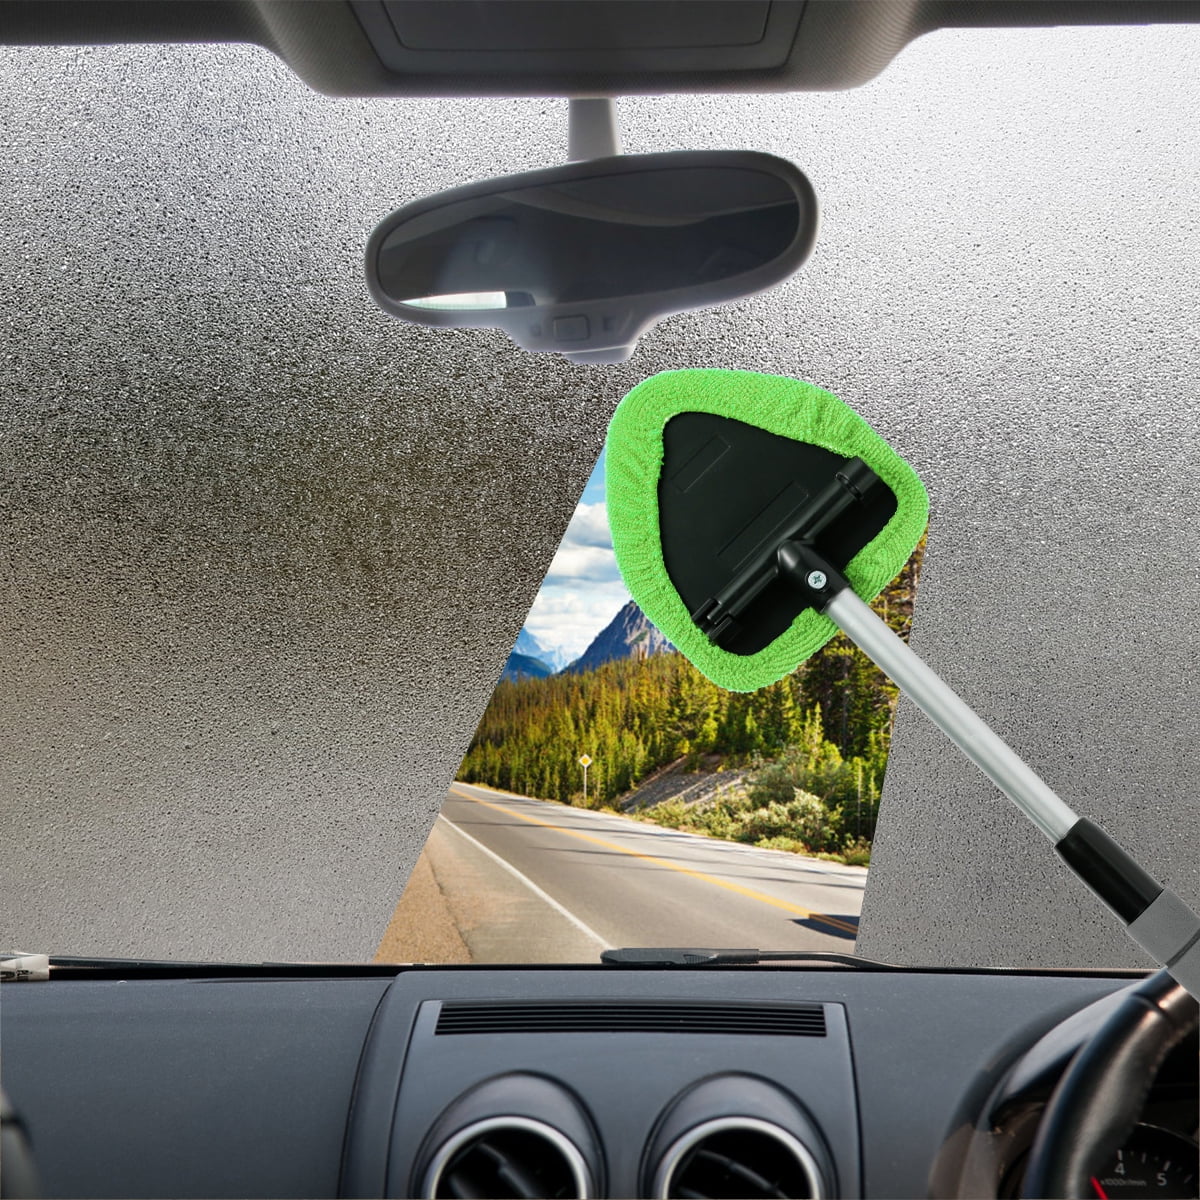 Podofo Car Windshield Cleaner Wand Cleaning Kit Interior Car